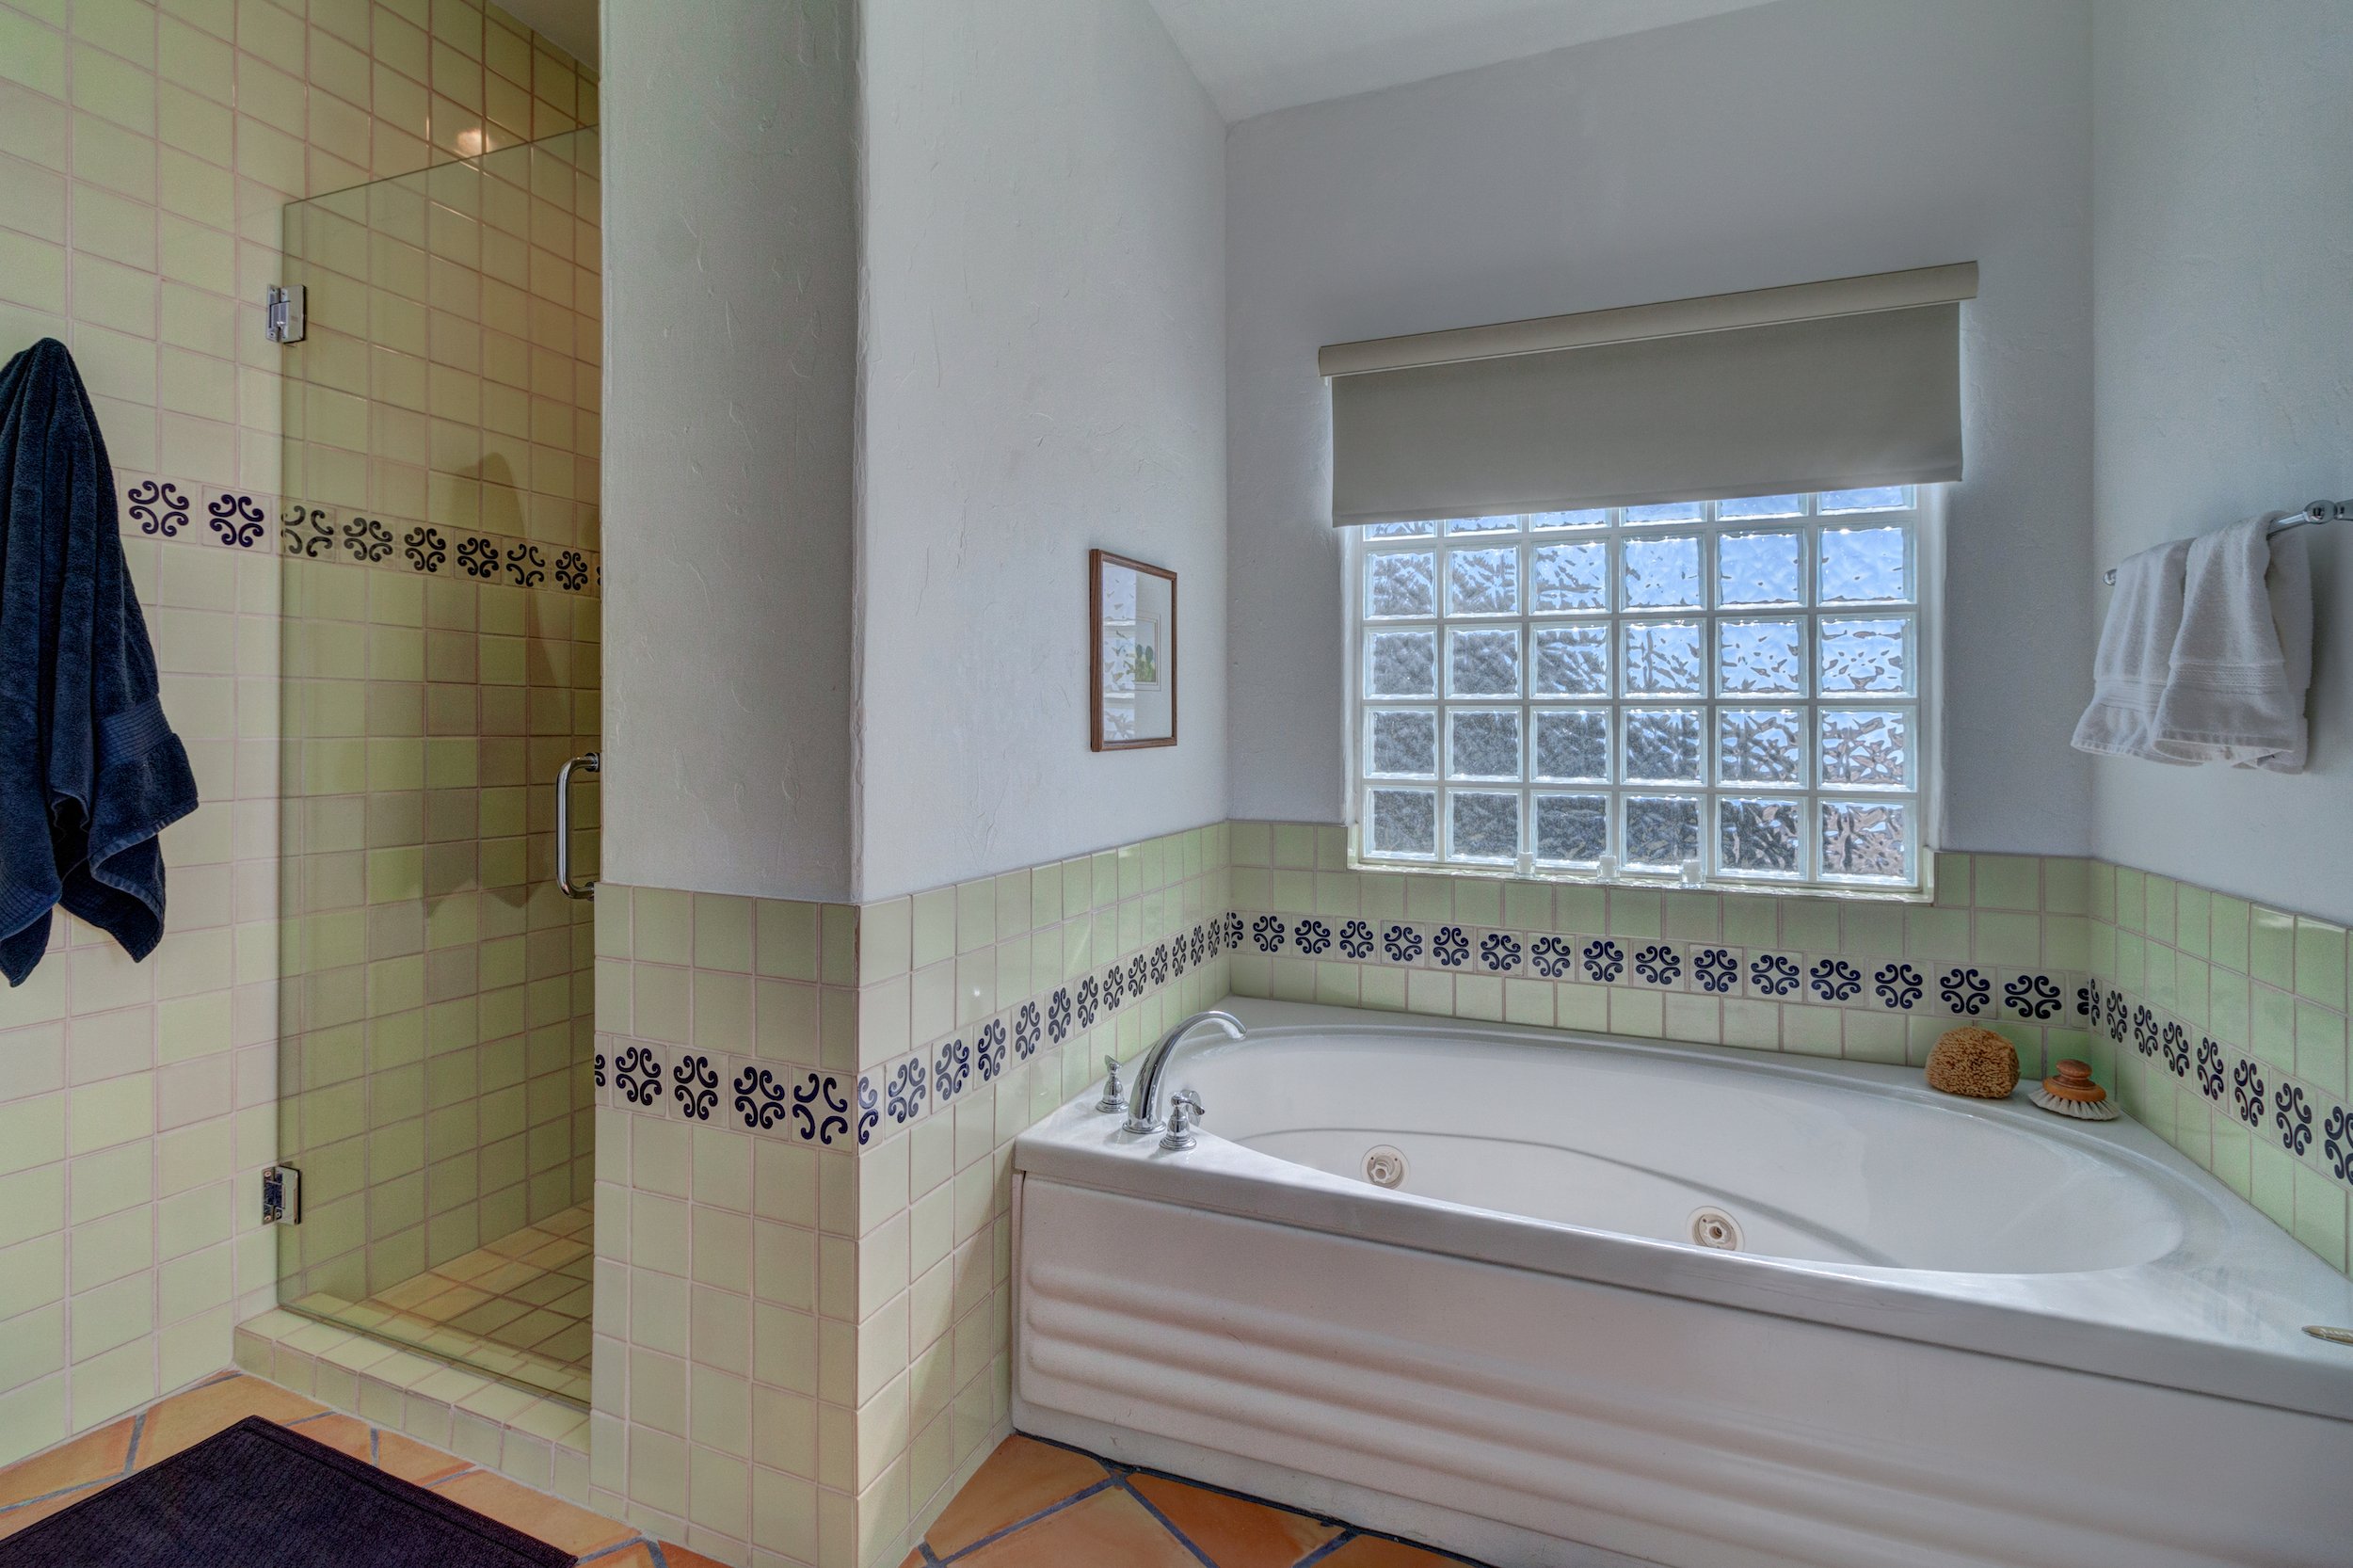 38-Tiled shower + jetted tub in the master bath.jpg